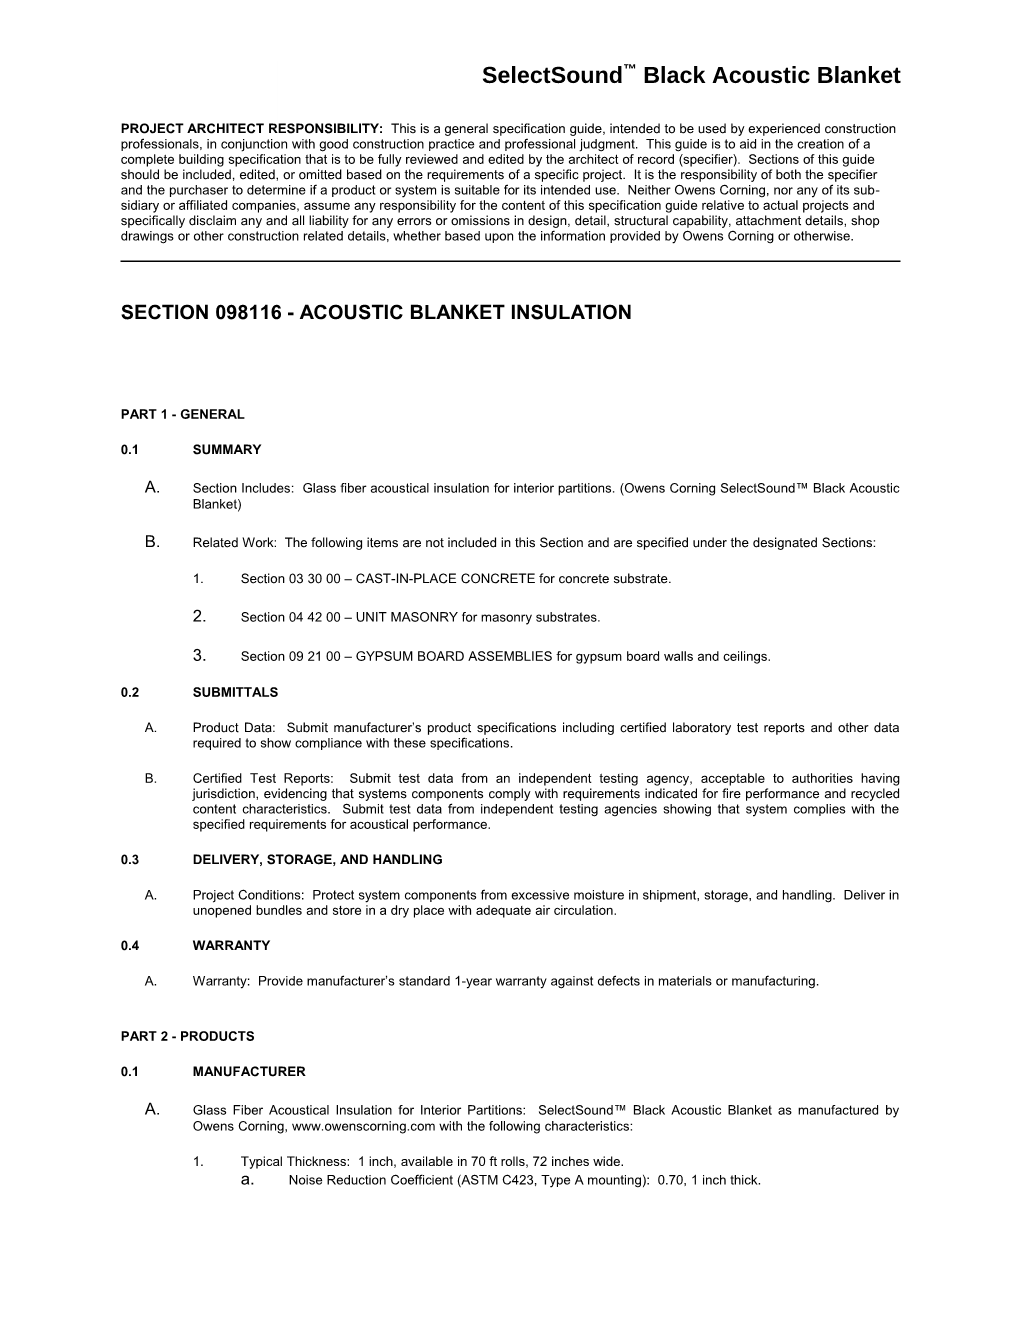 Section 098116 - ACOUSTIC BLANKET INSULATION